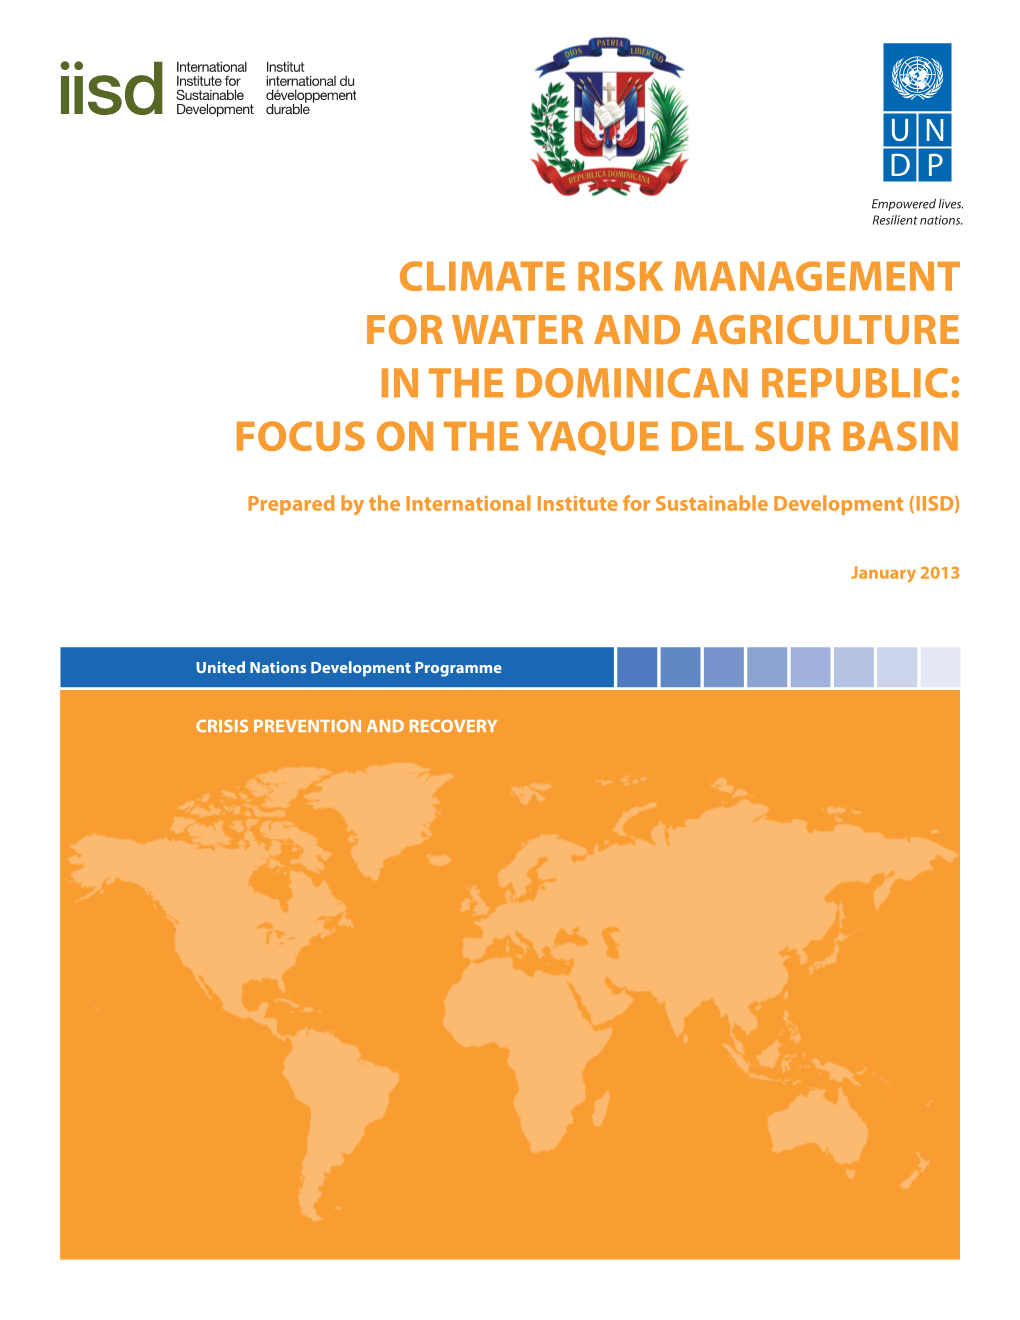 Climate Risk Management for Water and Agriculture in the Dominican Republic: Focus on the Yaque Del Sur Basin